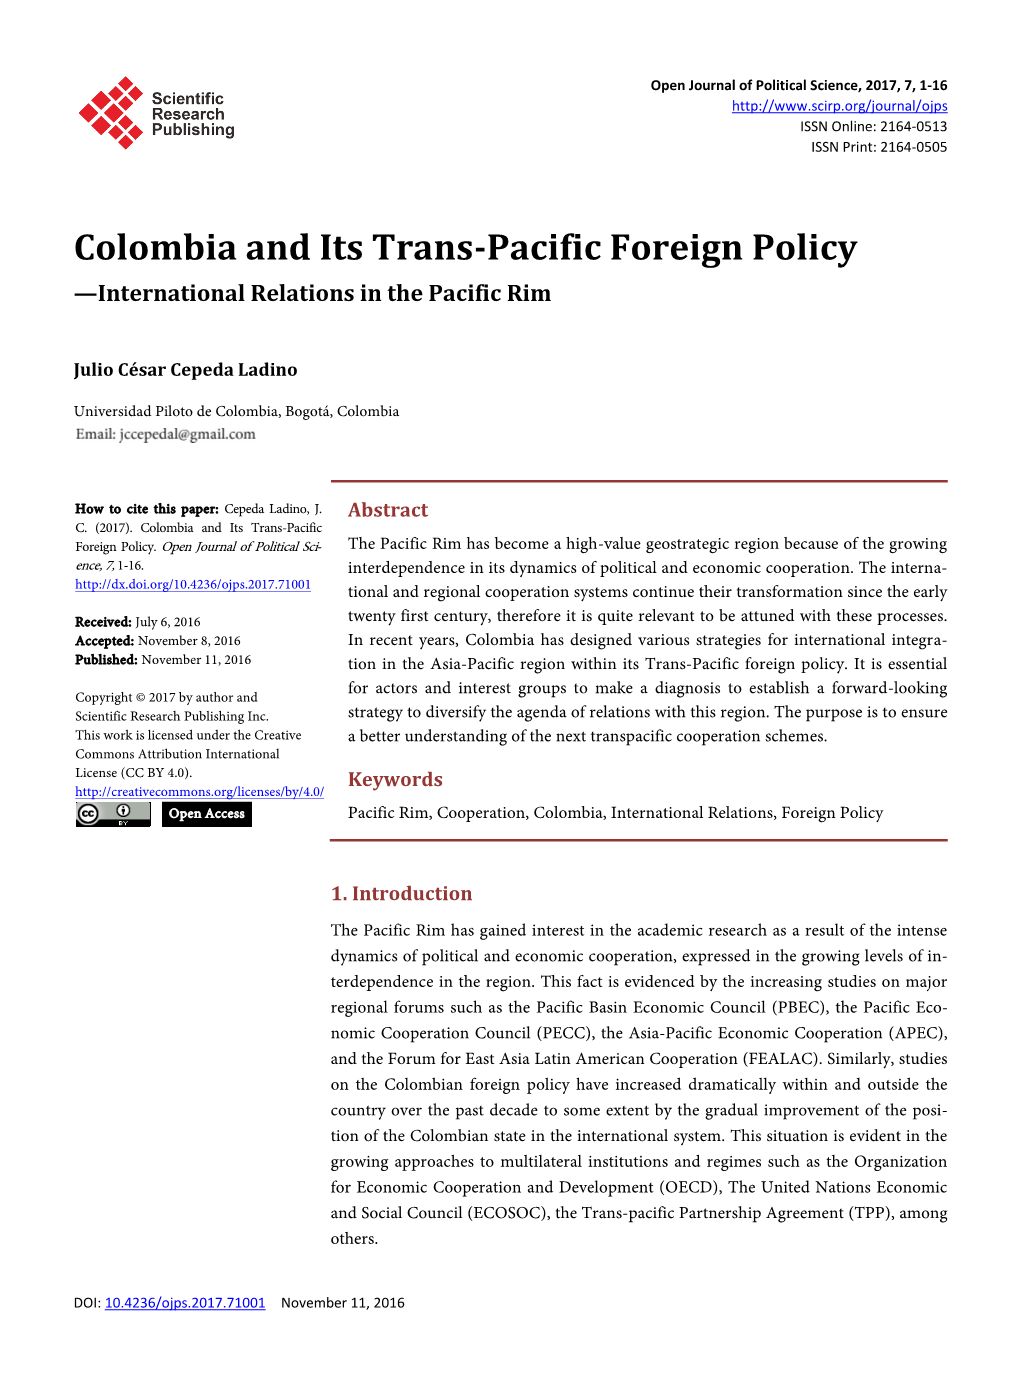 Colombia and Its Trans-Pacific Foreign Policy —International Relations in the Pacific Rim